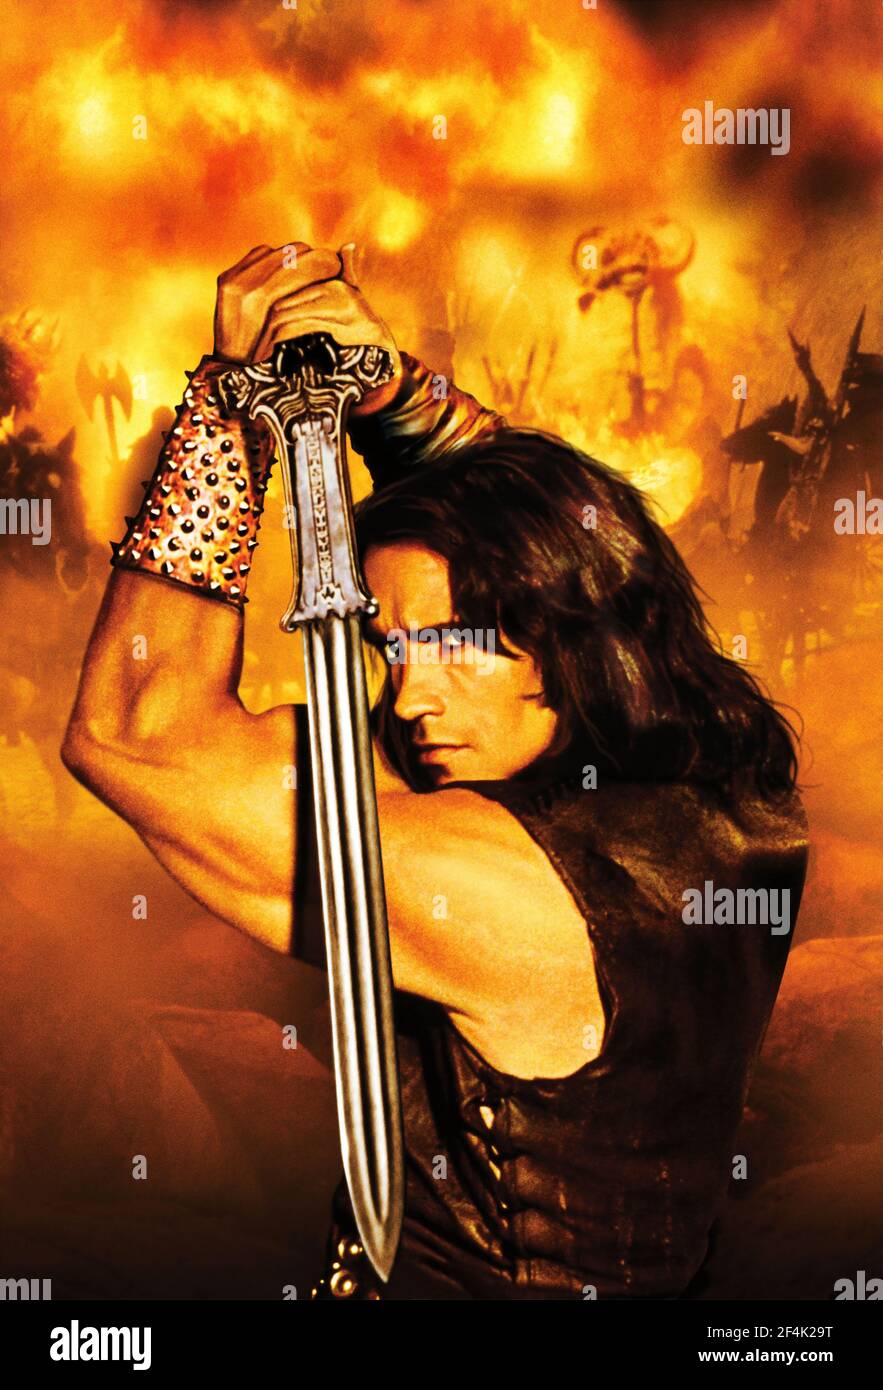 ARNOLD SCHWARZENEGGER in CONAN THE BARBARIAN (1982), directed by JOHN MILIUS. Copyright: Editorial use only. No merchandising or book covers. This is a publicly distributed handout. Access rights only, no license of copyright provided. Only to be reproduced in conjunction with promotion of this film. Credit: DE LAURENTIS ENTERTAINMENT GROUP / Album Stock Photo